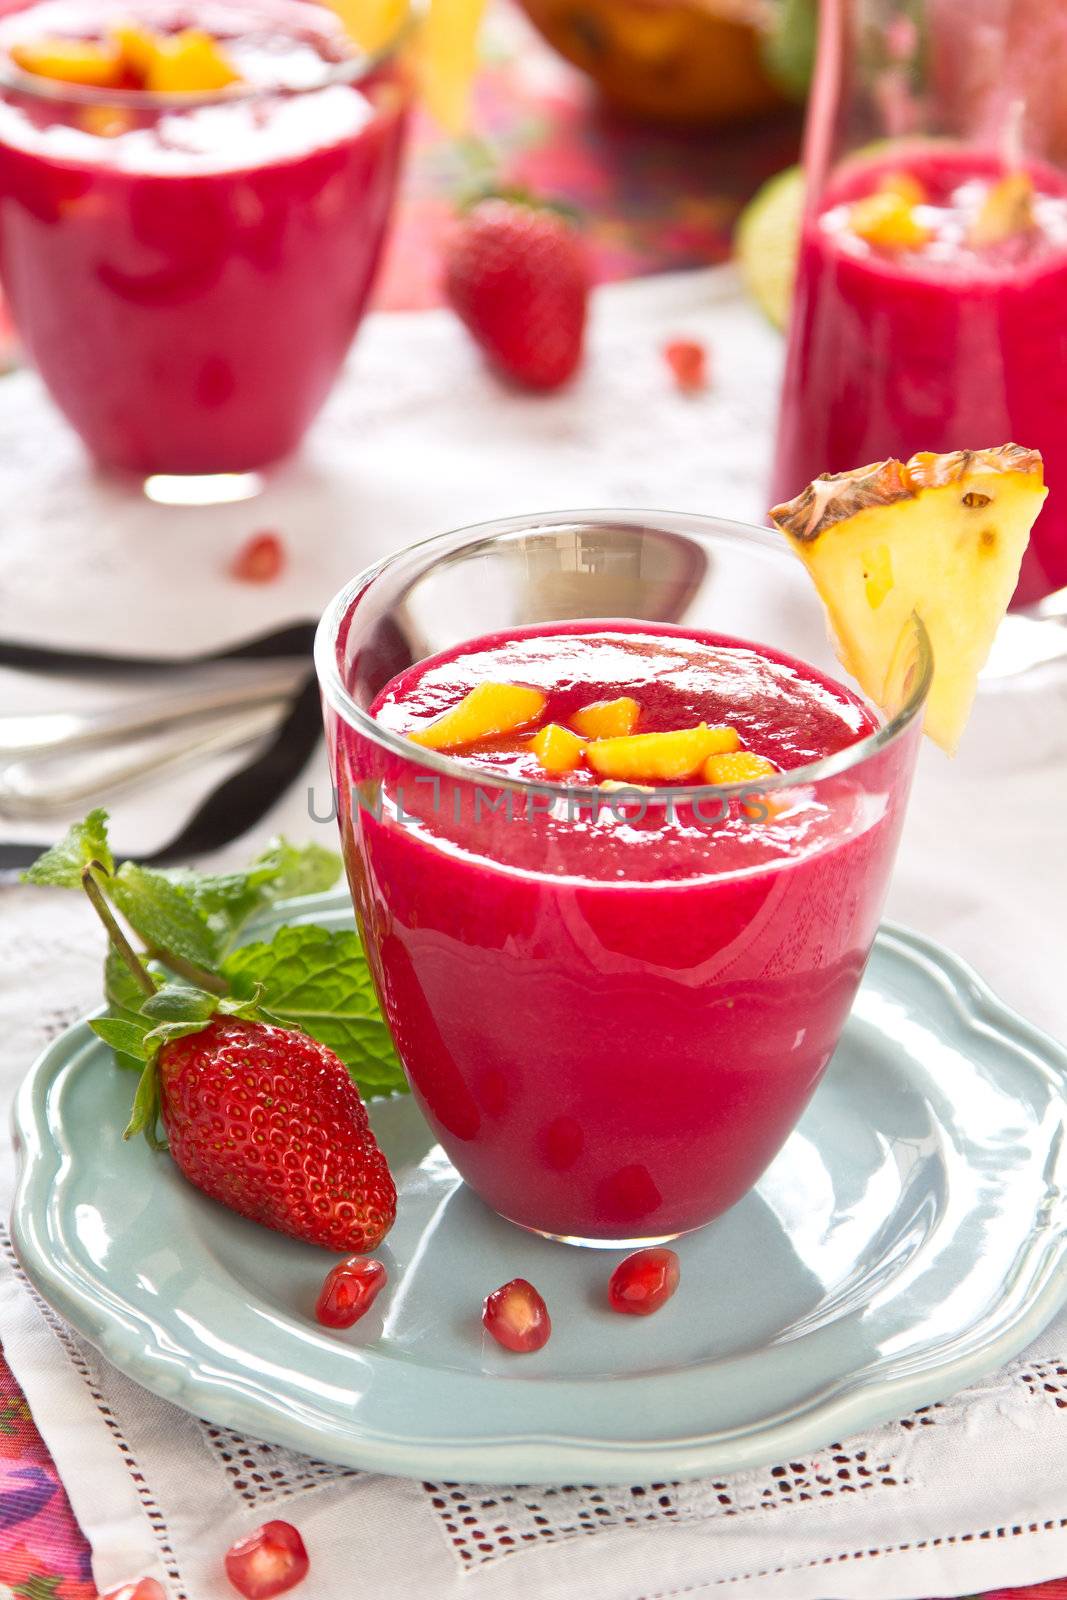 Beetroot,Mango and pomegranate smoothie by vanillaechoes